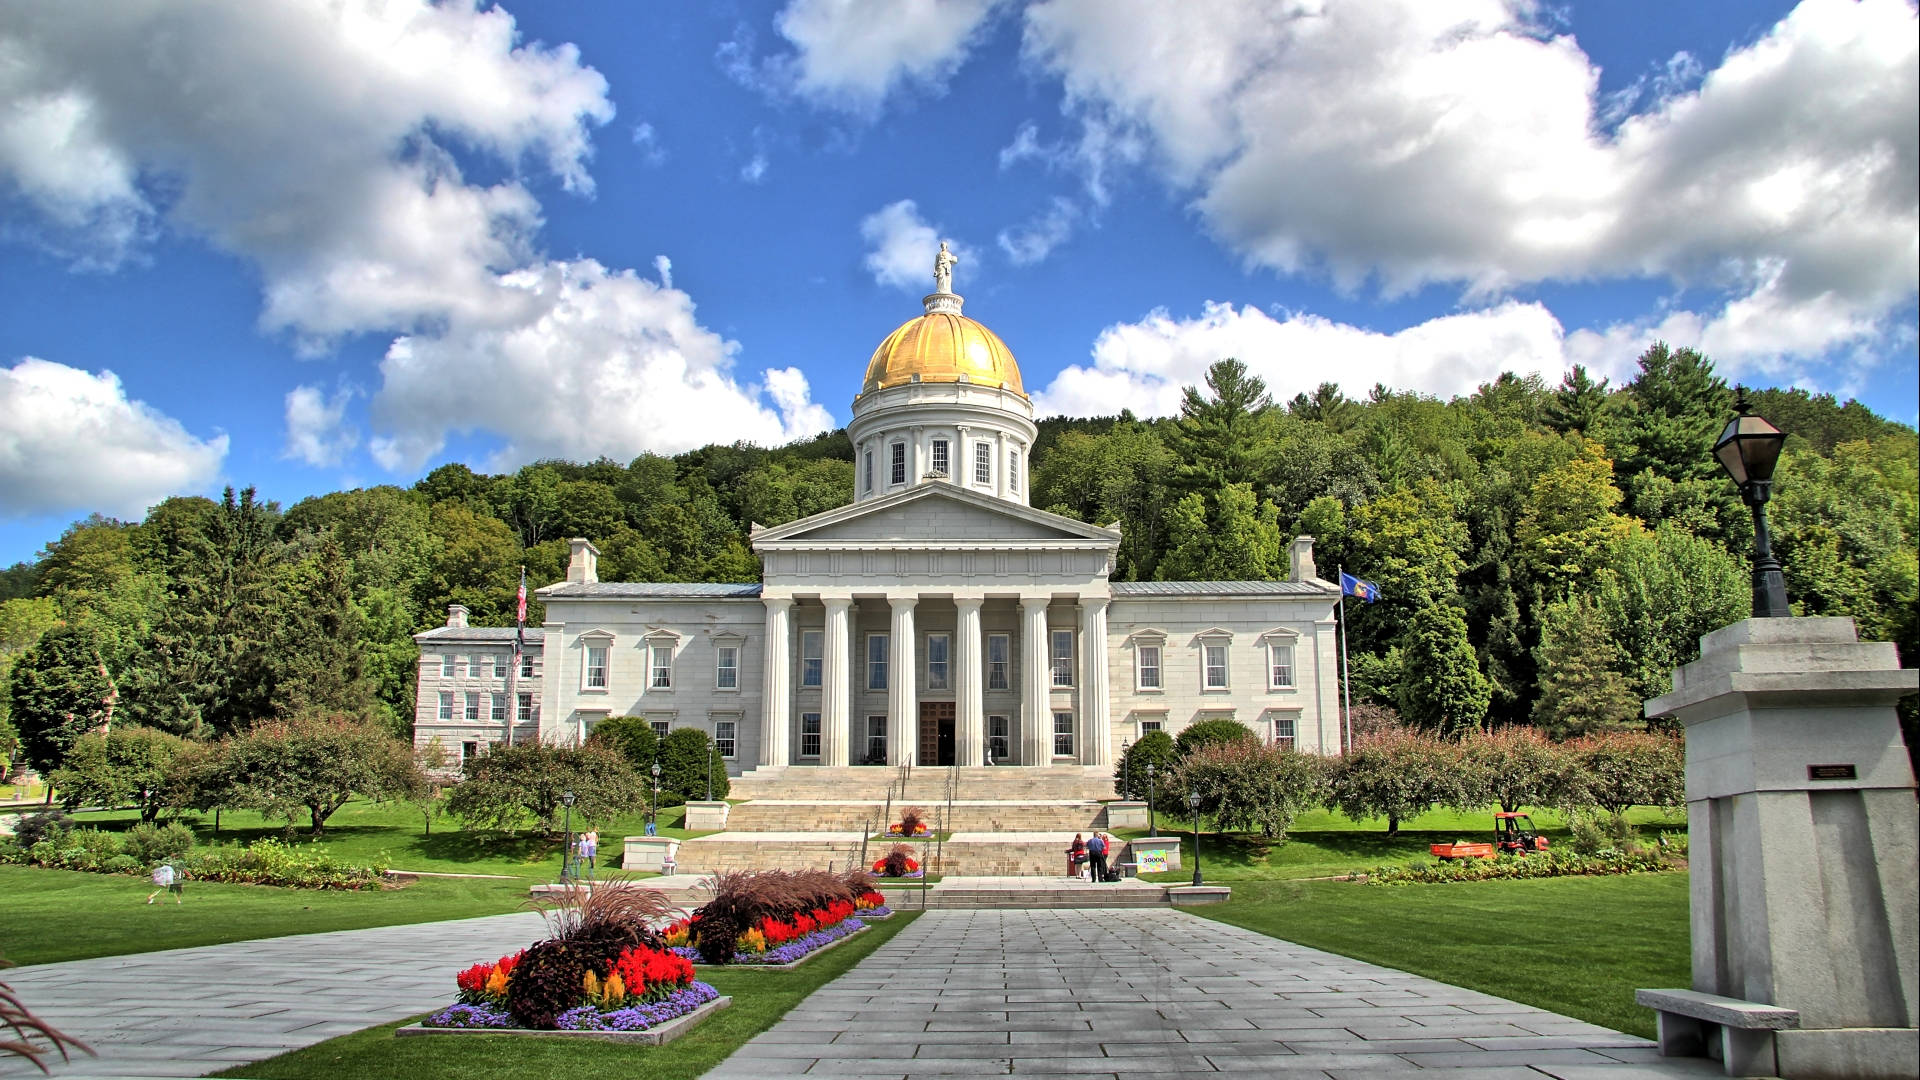 Vermont State House In Summer